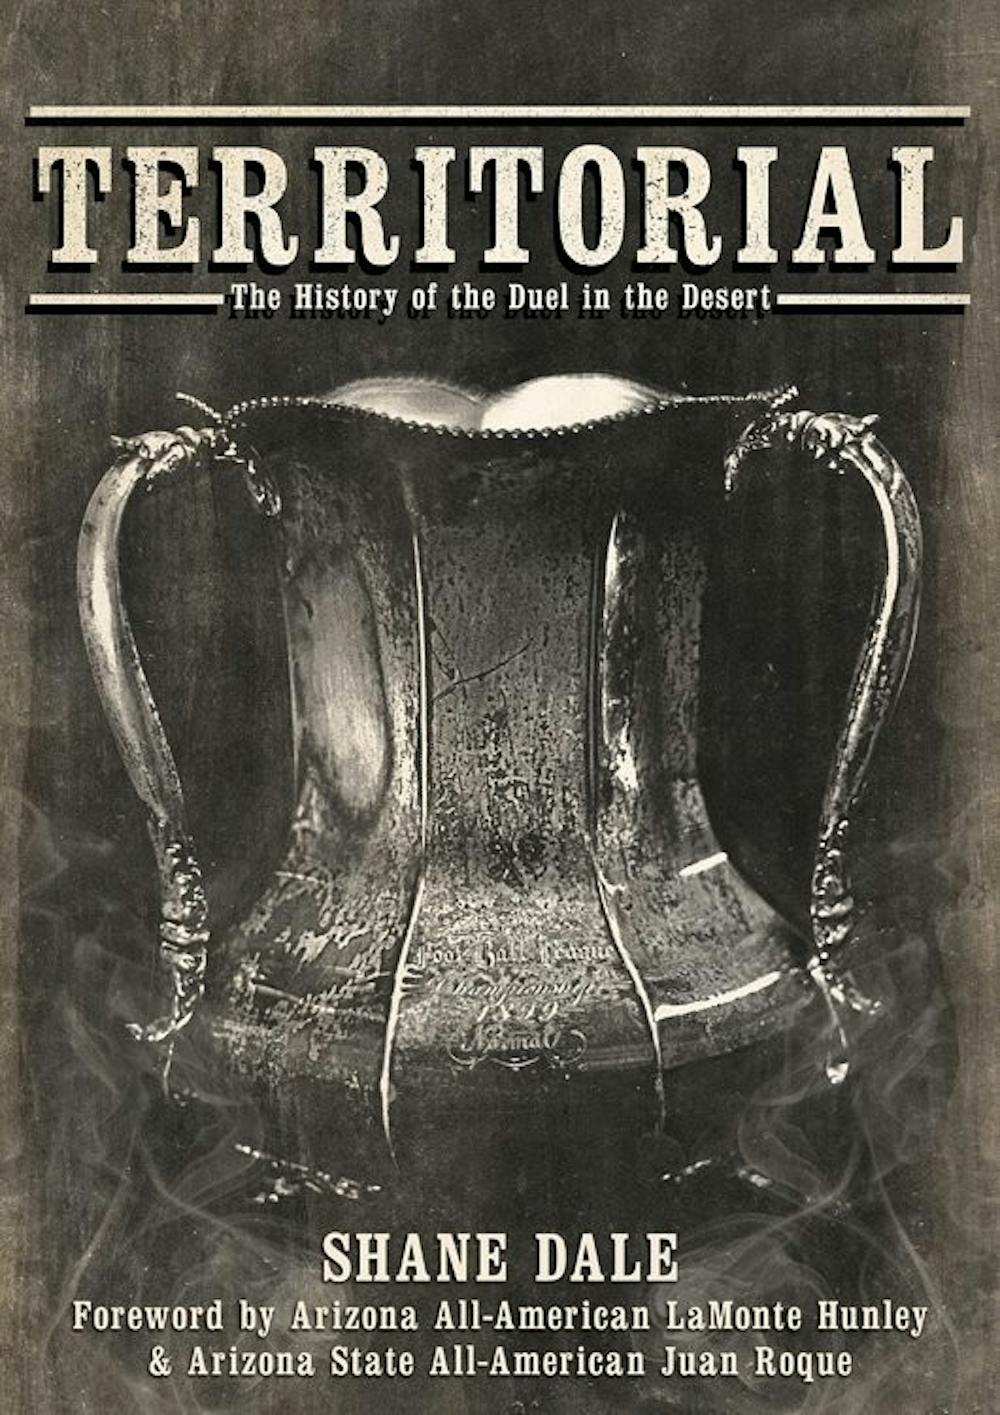 The Cover of “Territorial,” by Shane Dale. The book chronicles the rivalry between ASU and UA over these years through a series of interviews and testimonials. 
(Photo courtesy of Shane Dale.)
